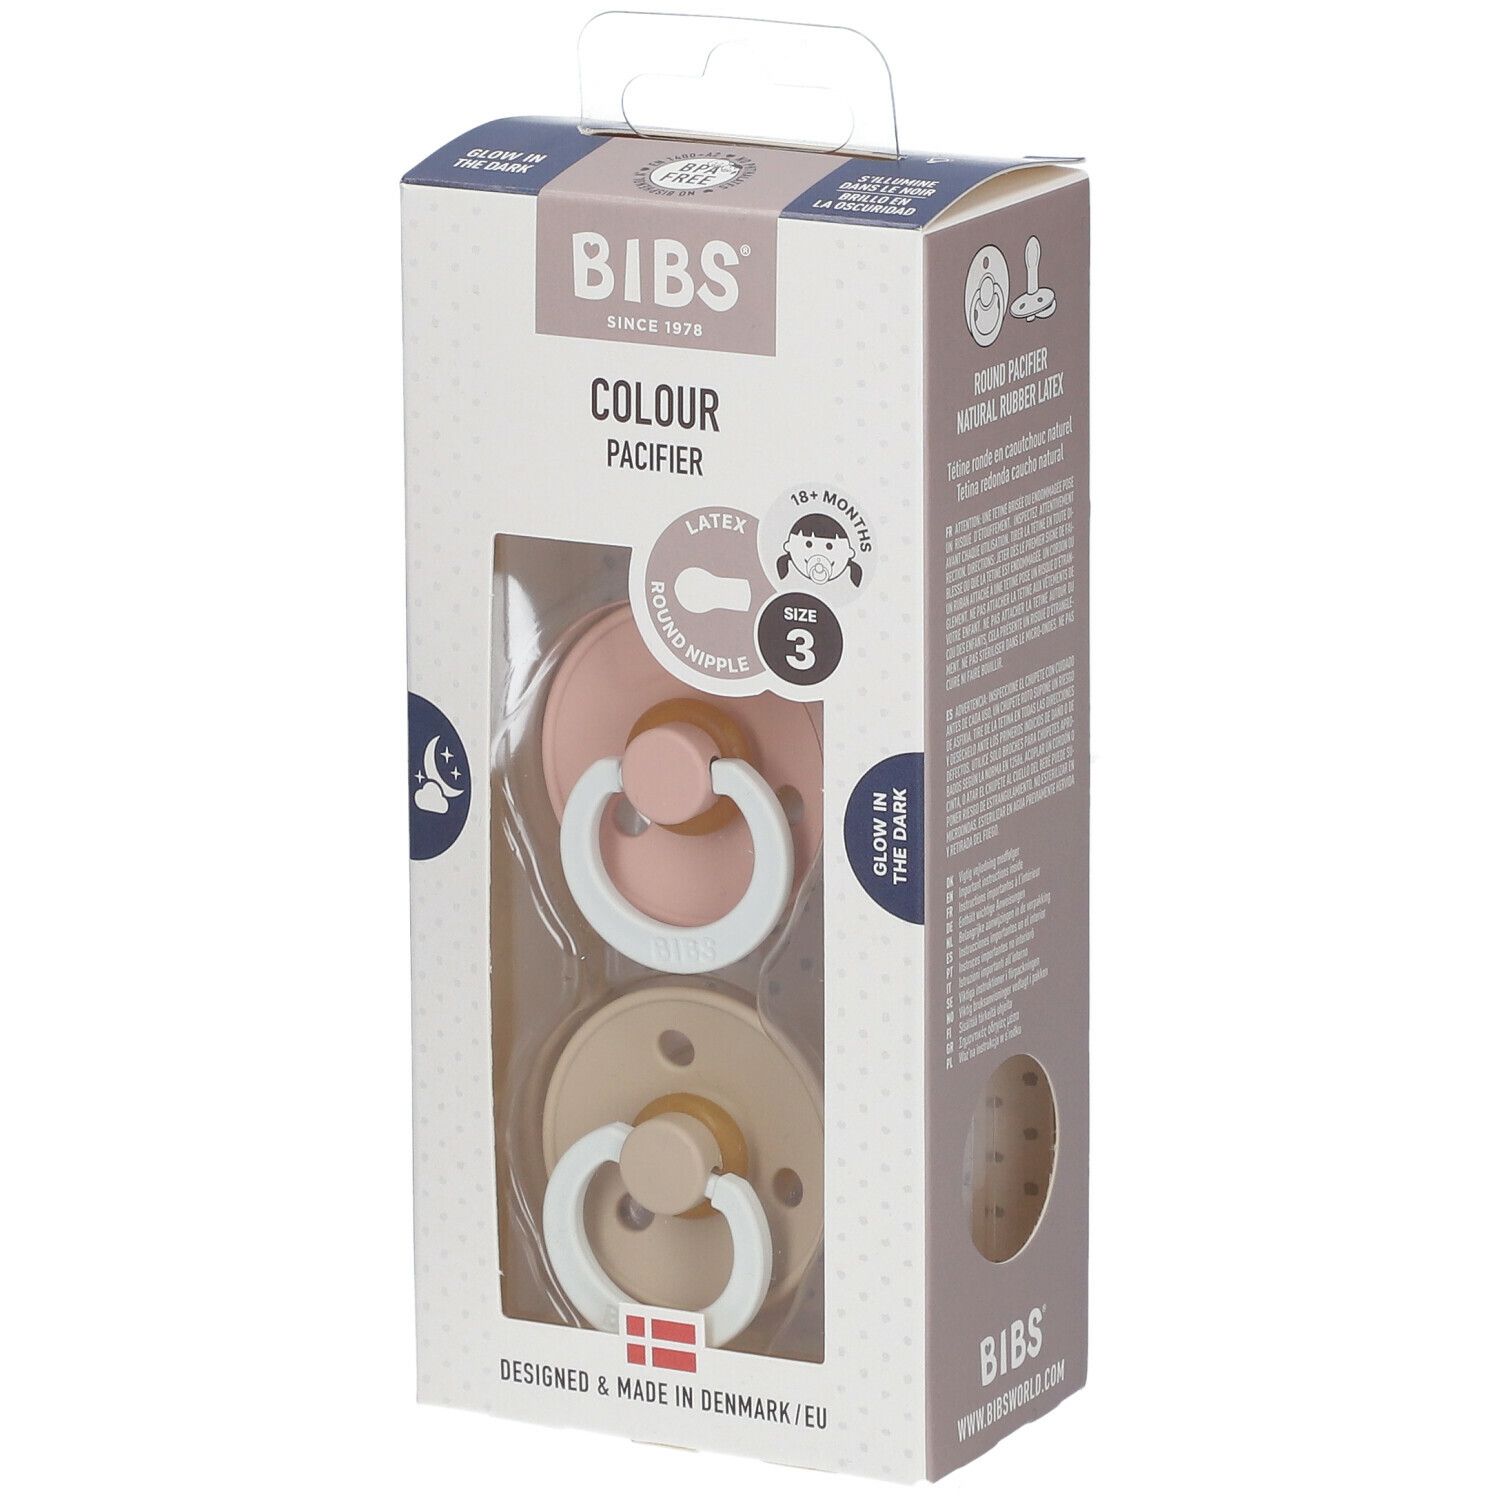 BIBS® BIBS COULEUR Tétines Nuit Blush - Vanille +18 mois Taille 3 2 pc(s) -  Redcare Pharmacie